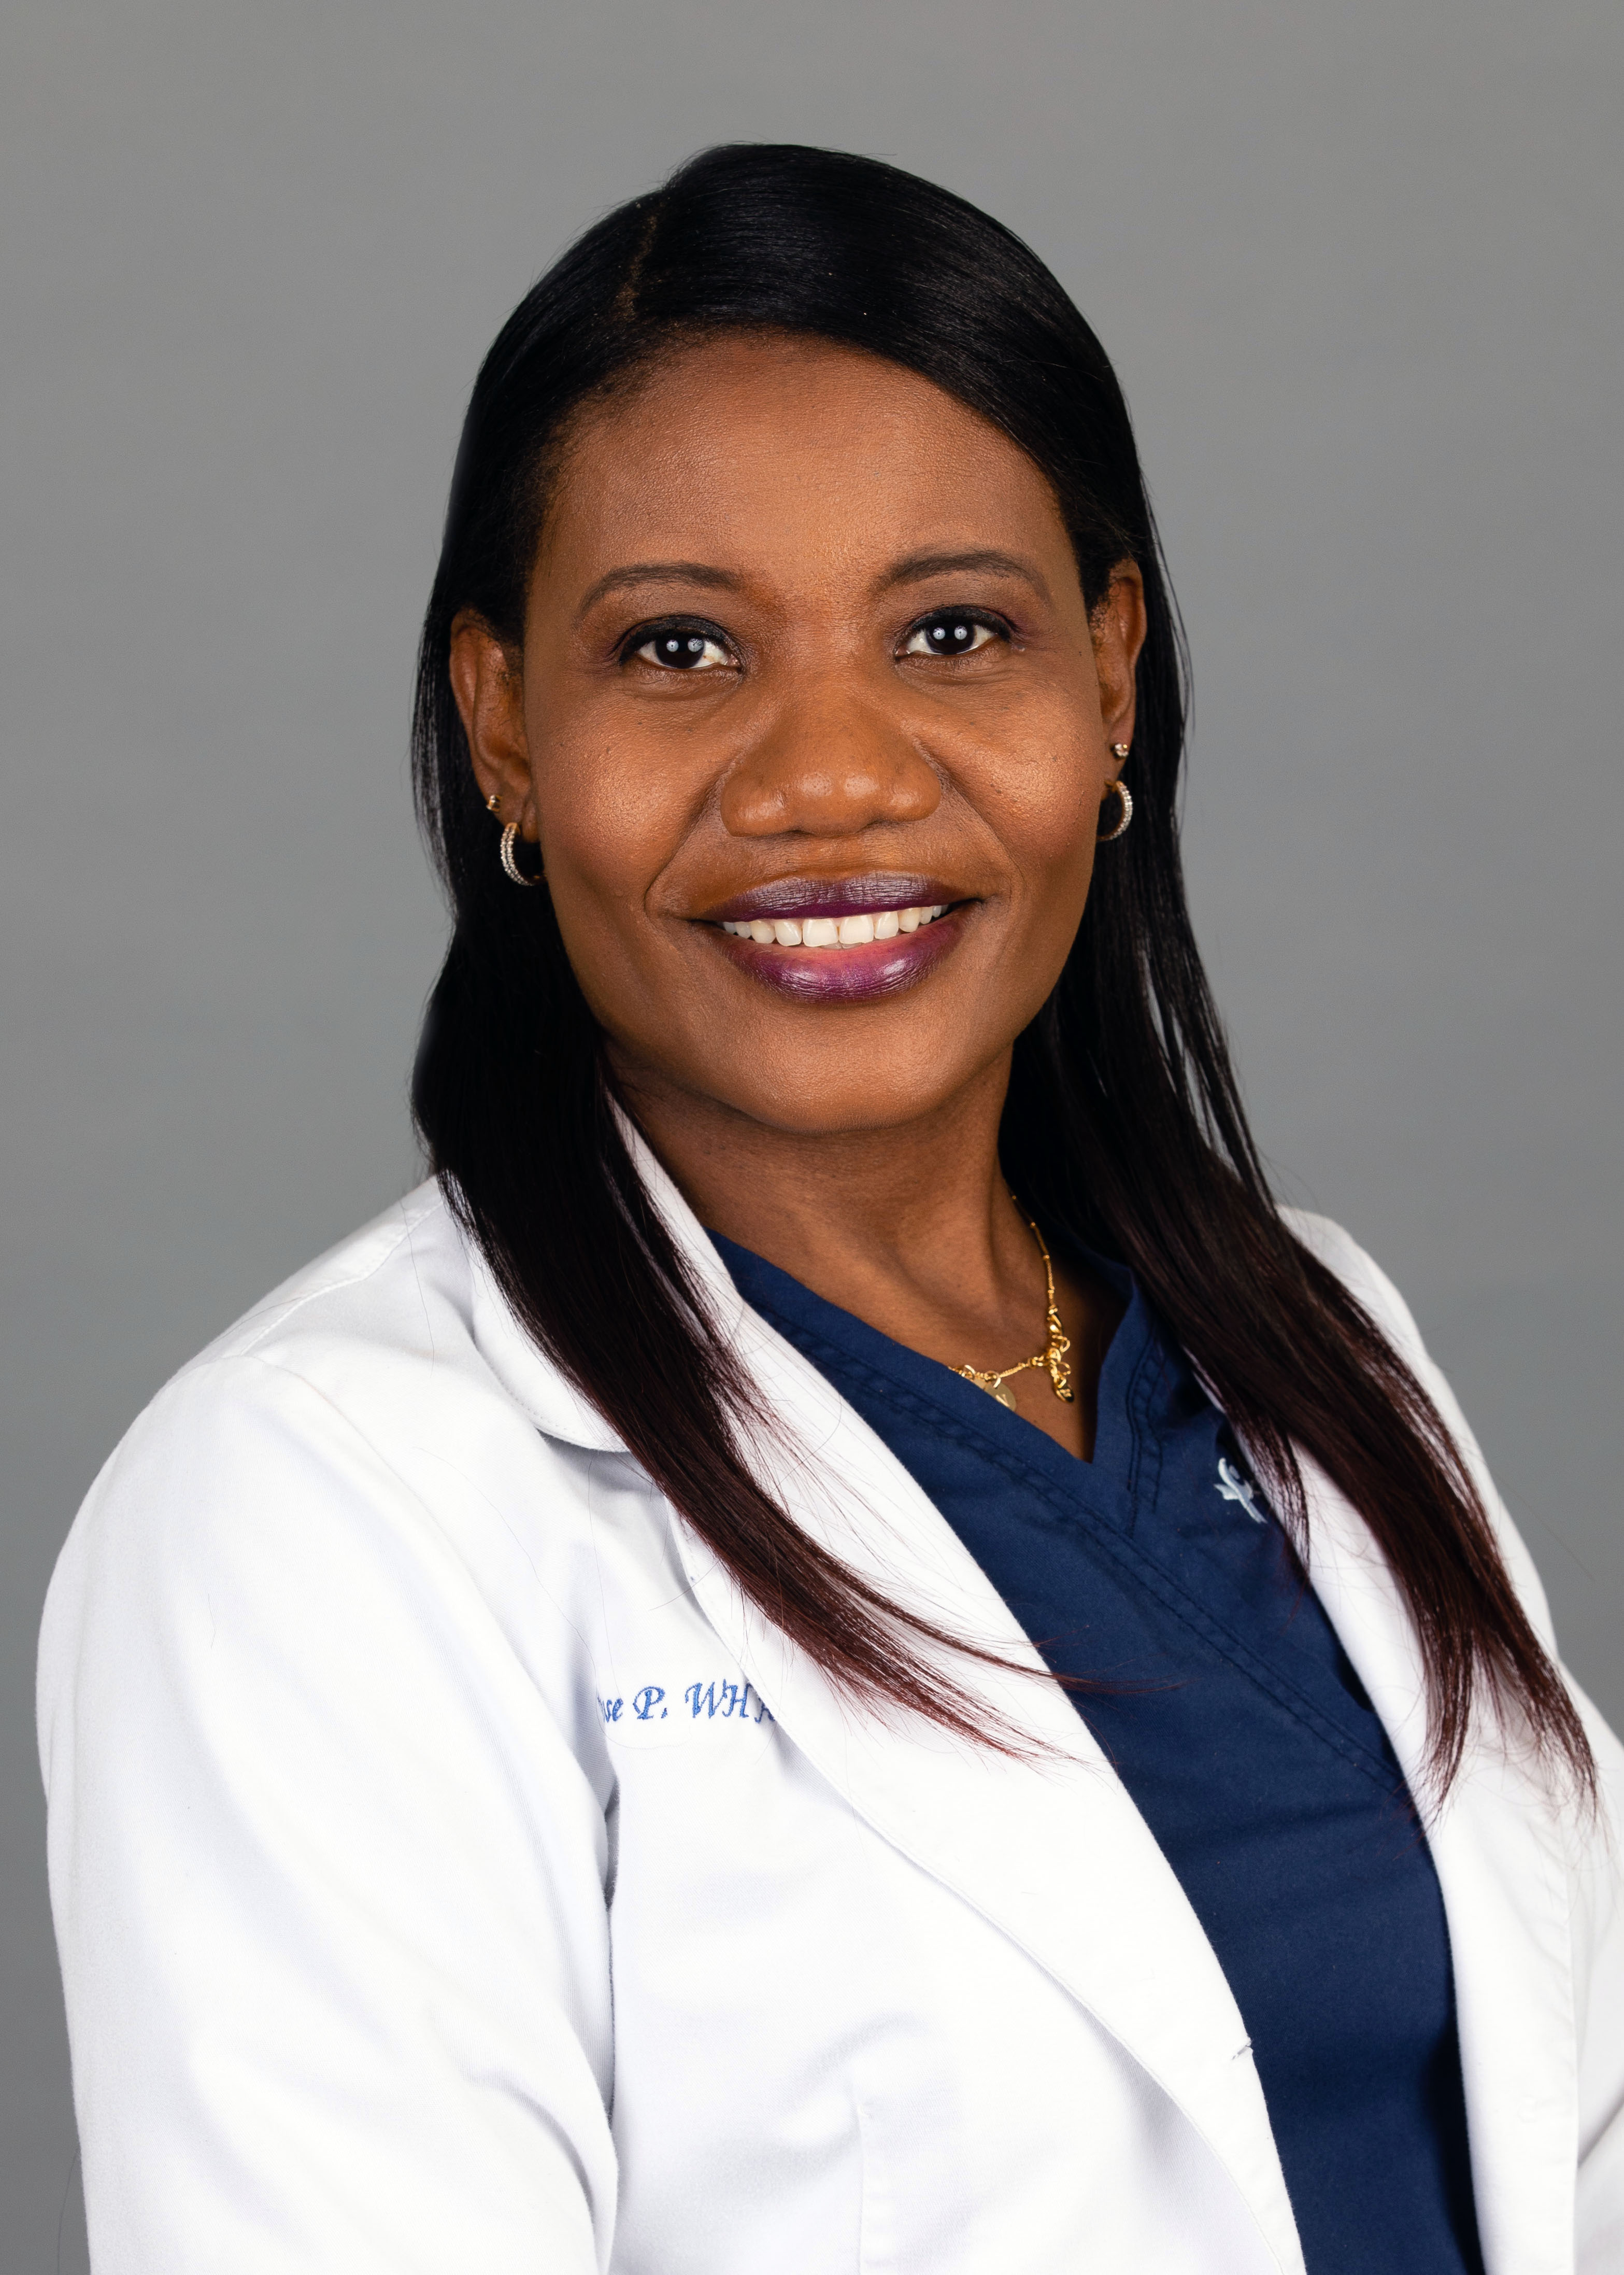 FoundCare Welcomes Dr. Rose Philius, DNP, FNP-BC, as New Chief Medical Officer